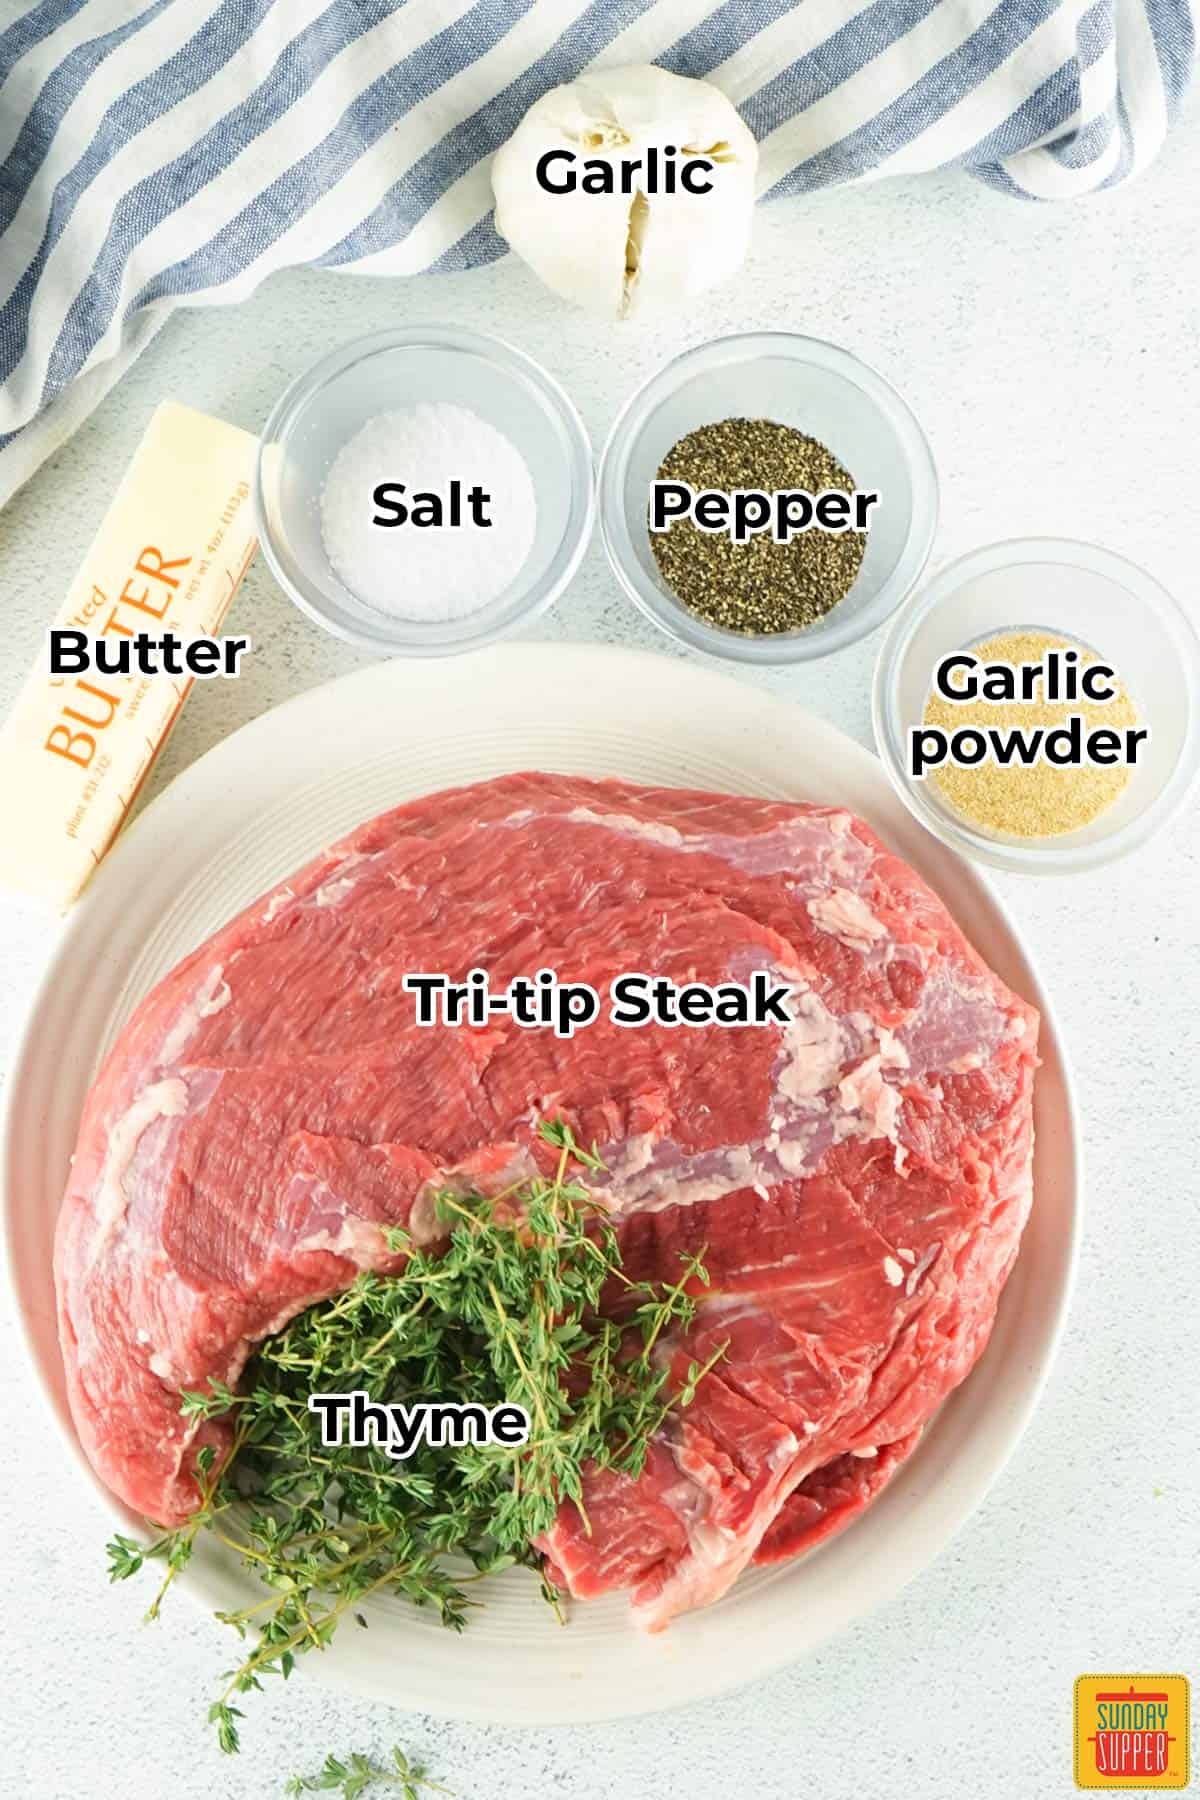 all of the ingredients for smoked tri tip in separate bowls with labels